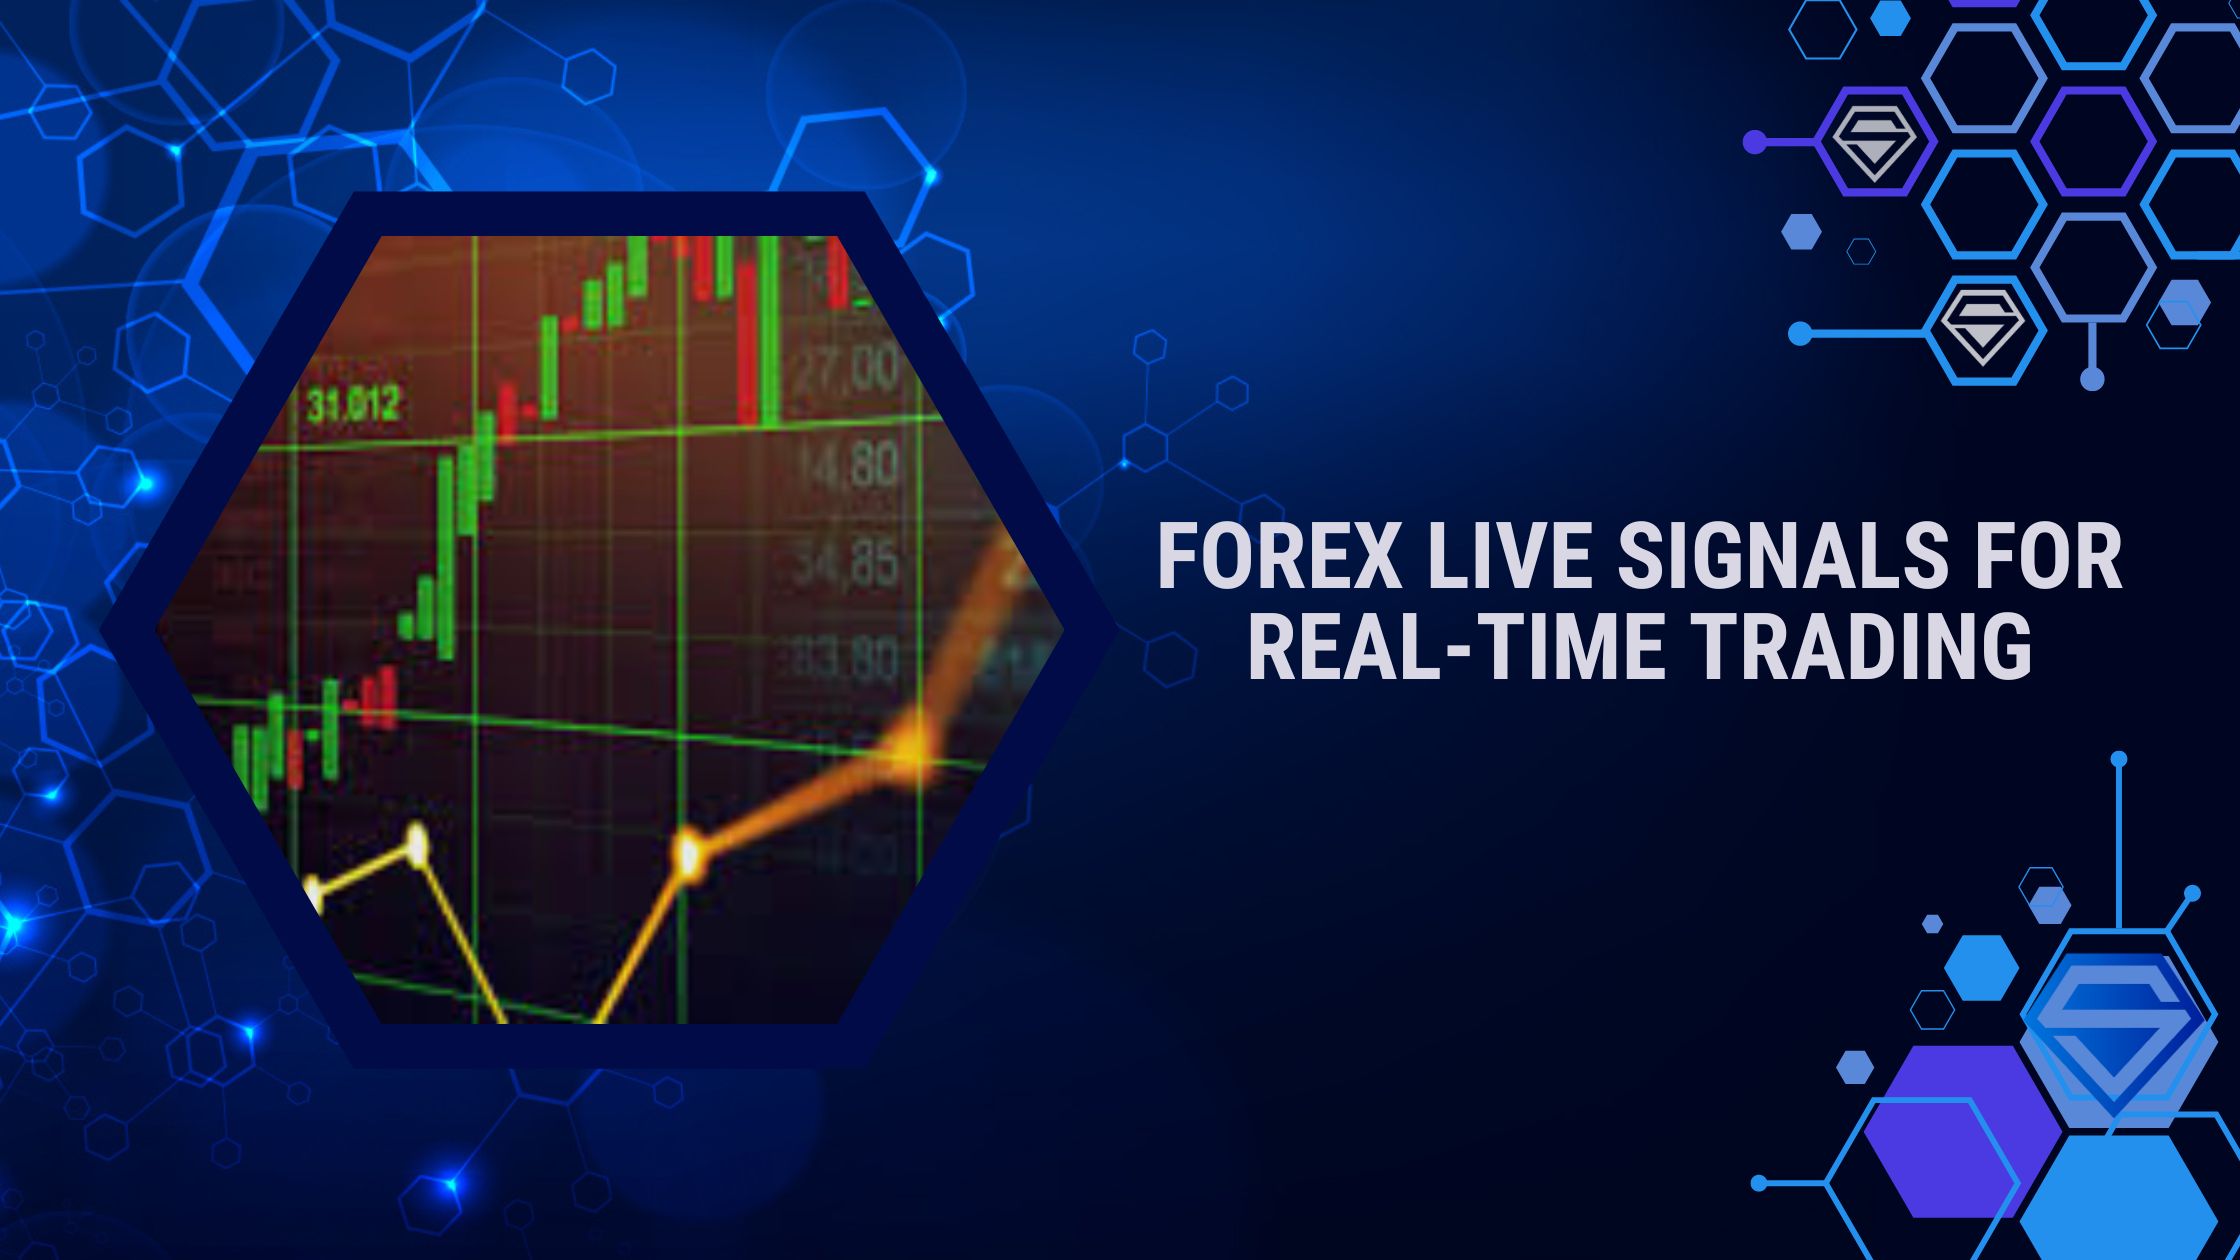 Forex Live Signals for Real-Time Trading